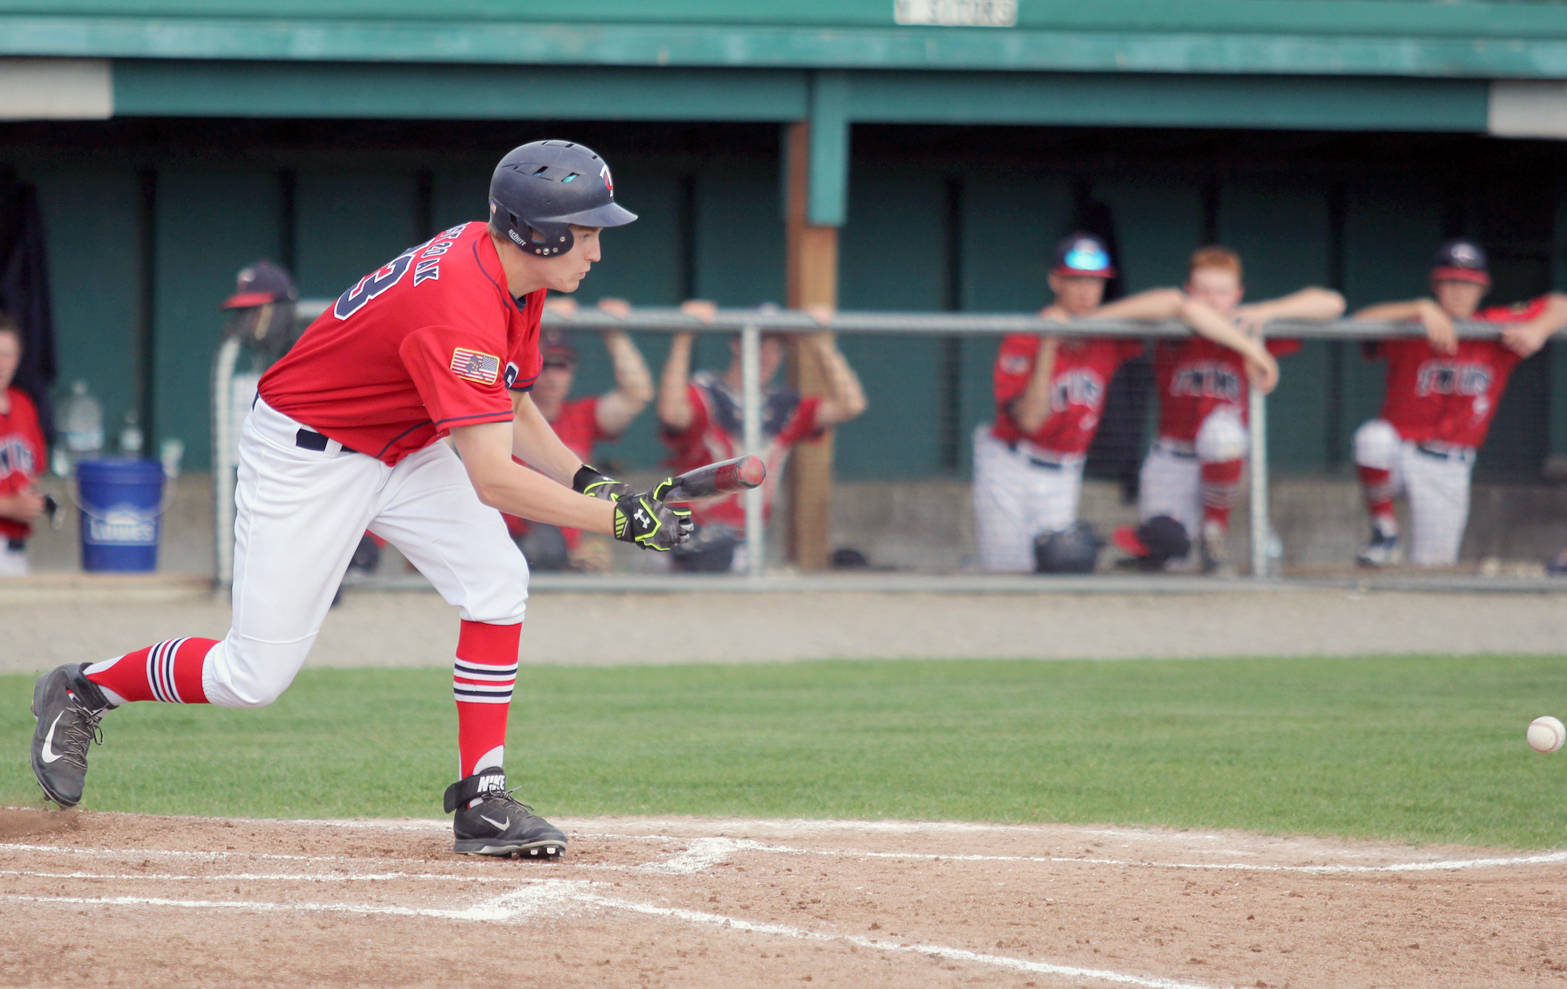 Kenai’s Tanner Ussing puts down a bunt during an 11-3 win over the Palmer Pioneers on Friday, July 21, 2017, at Hermon Brothers Field in Palmer. (Photo by Jeremiah Bartz/Frontiersman)